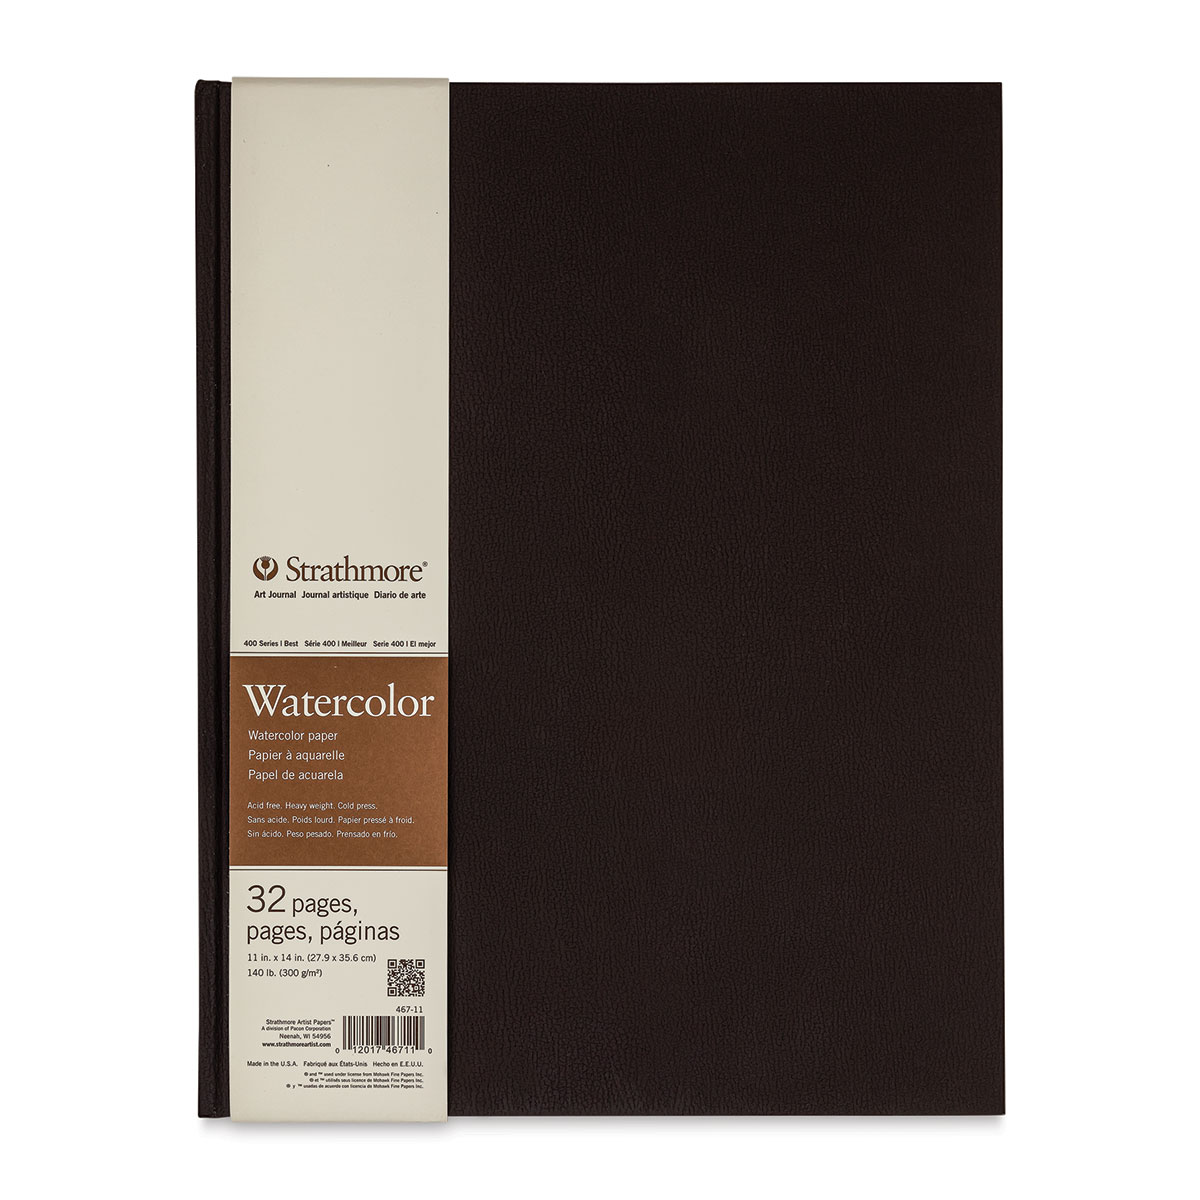 Strathmore 400 Series Visual Watercolor Journal, 90 LB 9x12 Cold Press,  Wire Bound, 34 Sheets